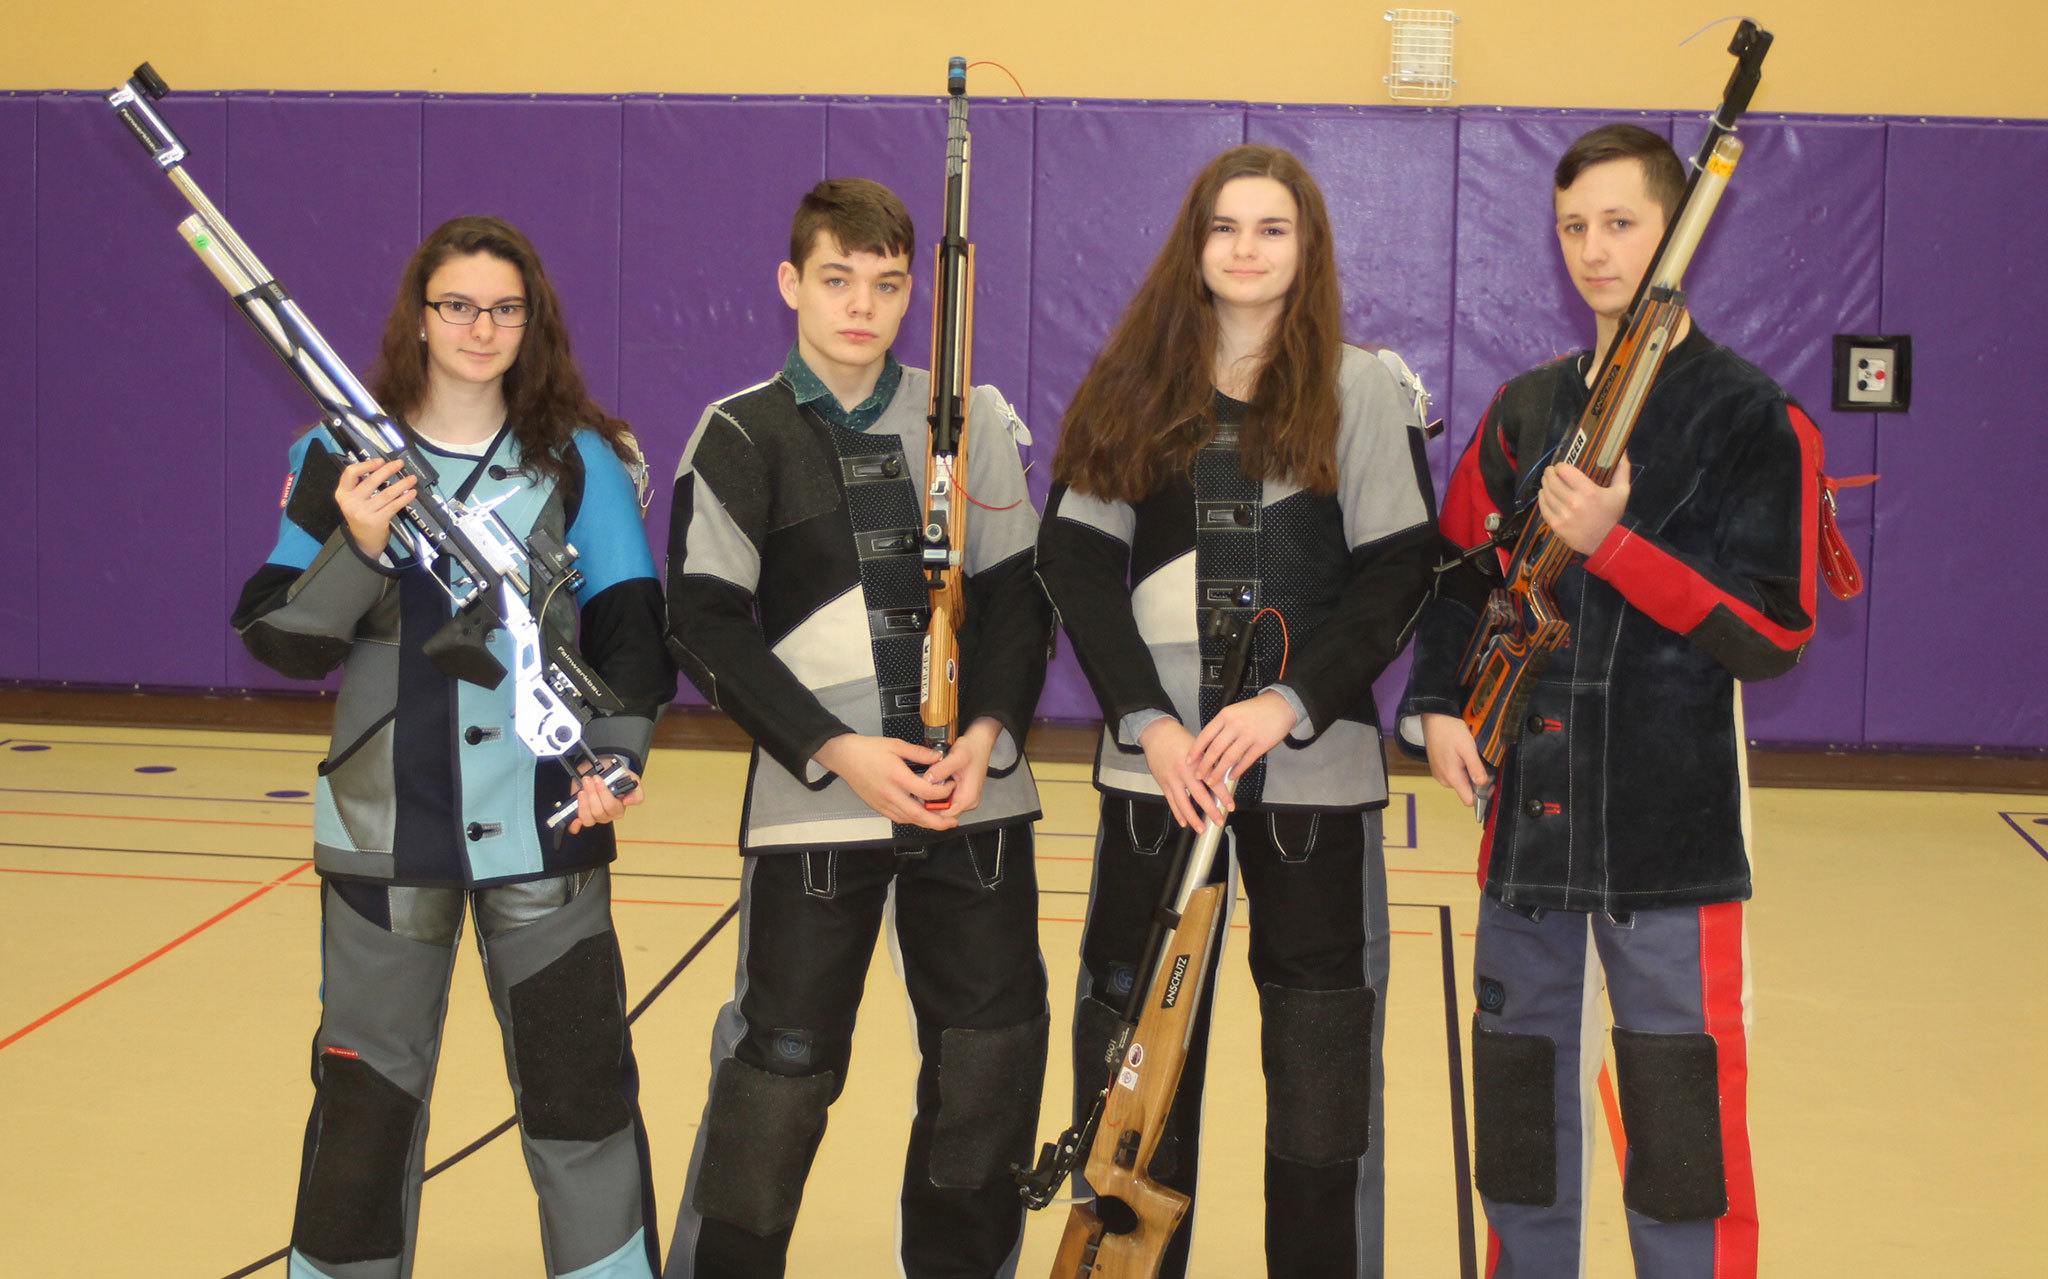 Elena Flake, left, Michael White, Julia Flake and Austin McBride will be joined by captain Mia Gehrmann in Alabama next week at the national Service Air Rifle Championships. (Photo by Jim Waller/Whidbey News/Times)